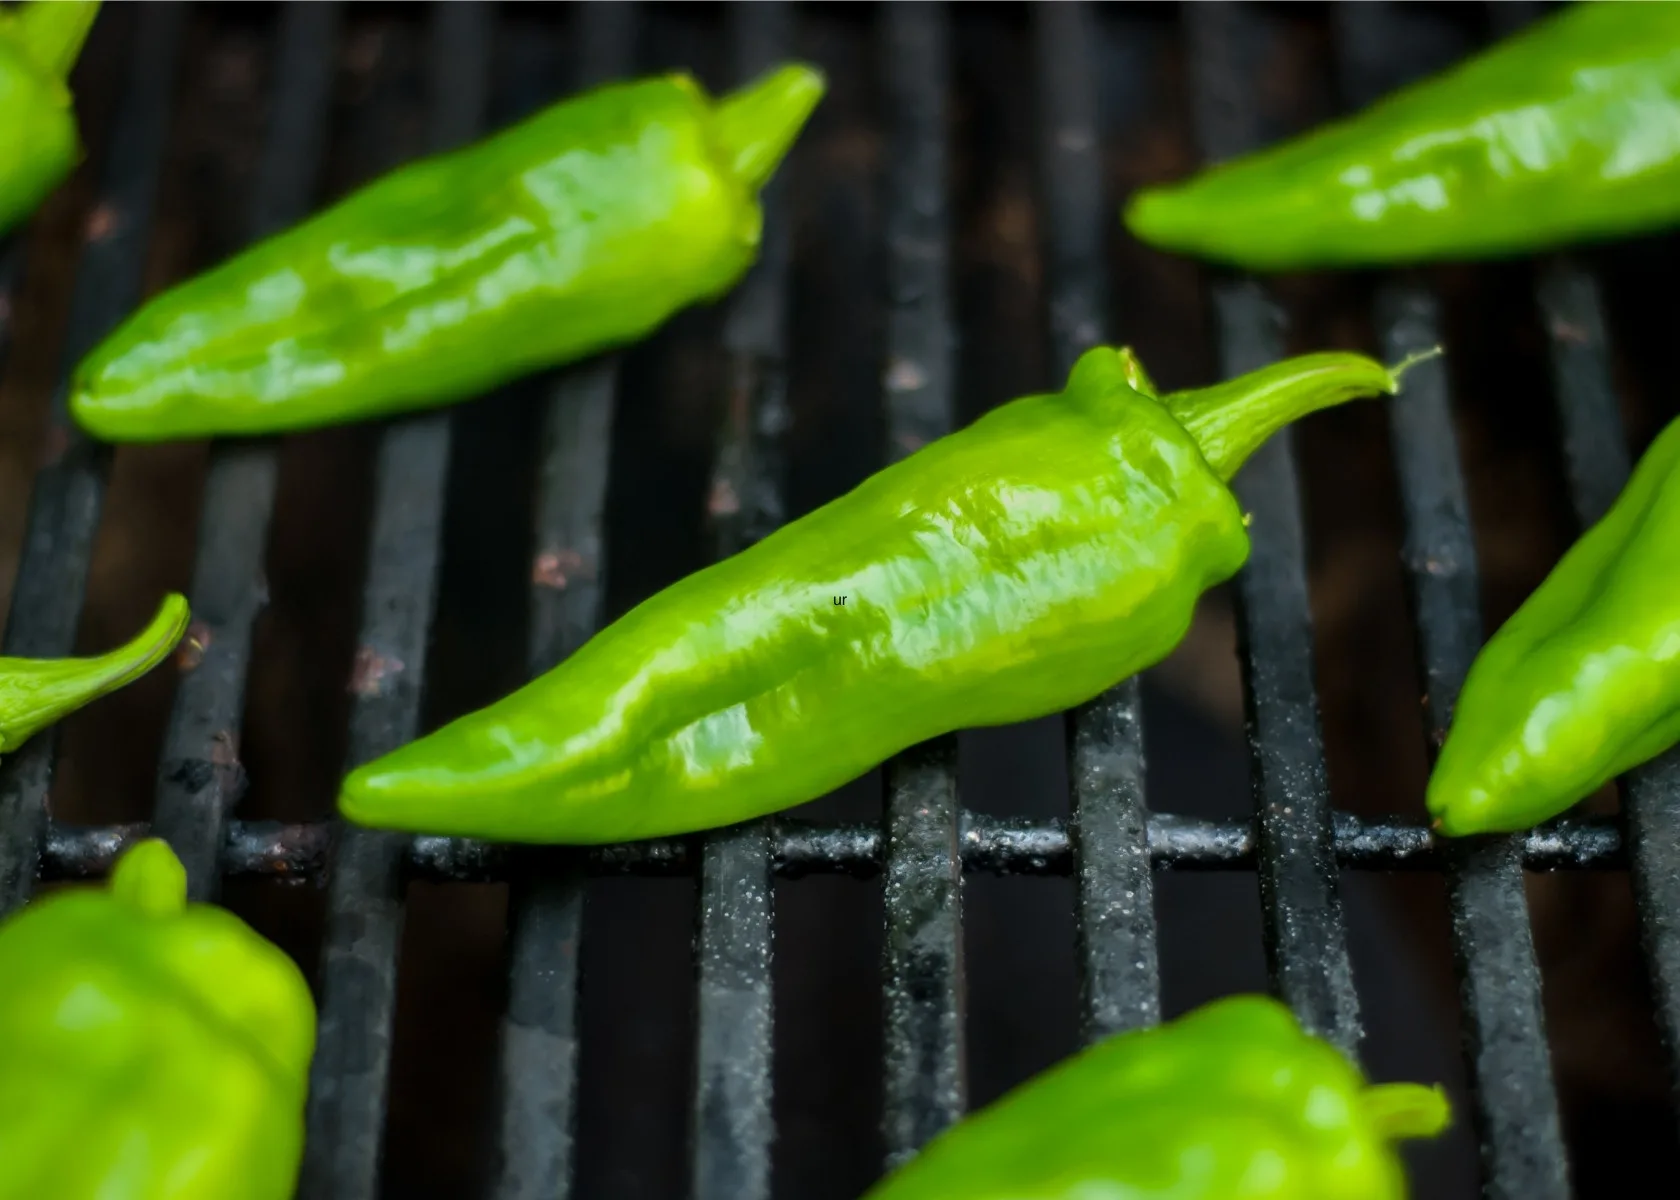 Close up of several bright green Anaheim peppers cooking on grill grate.